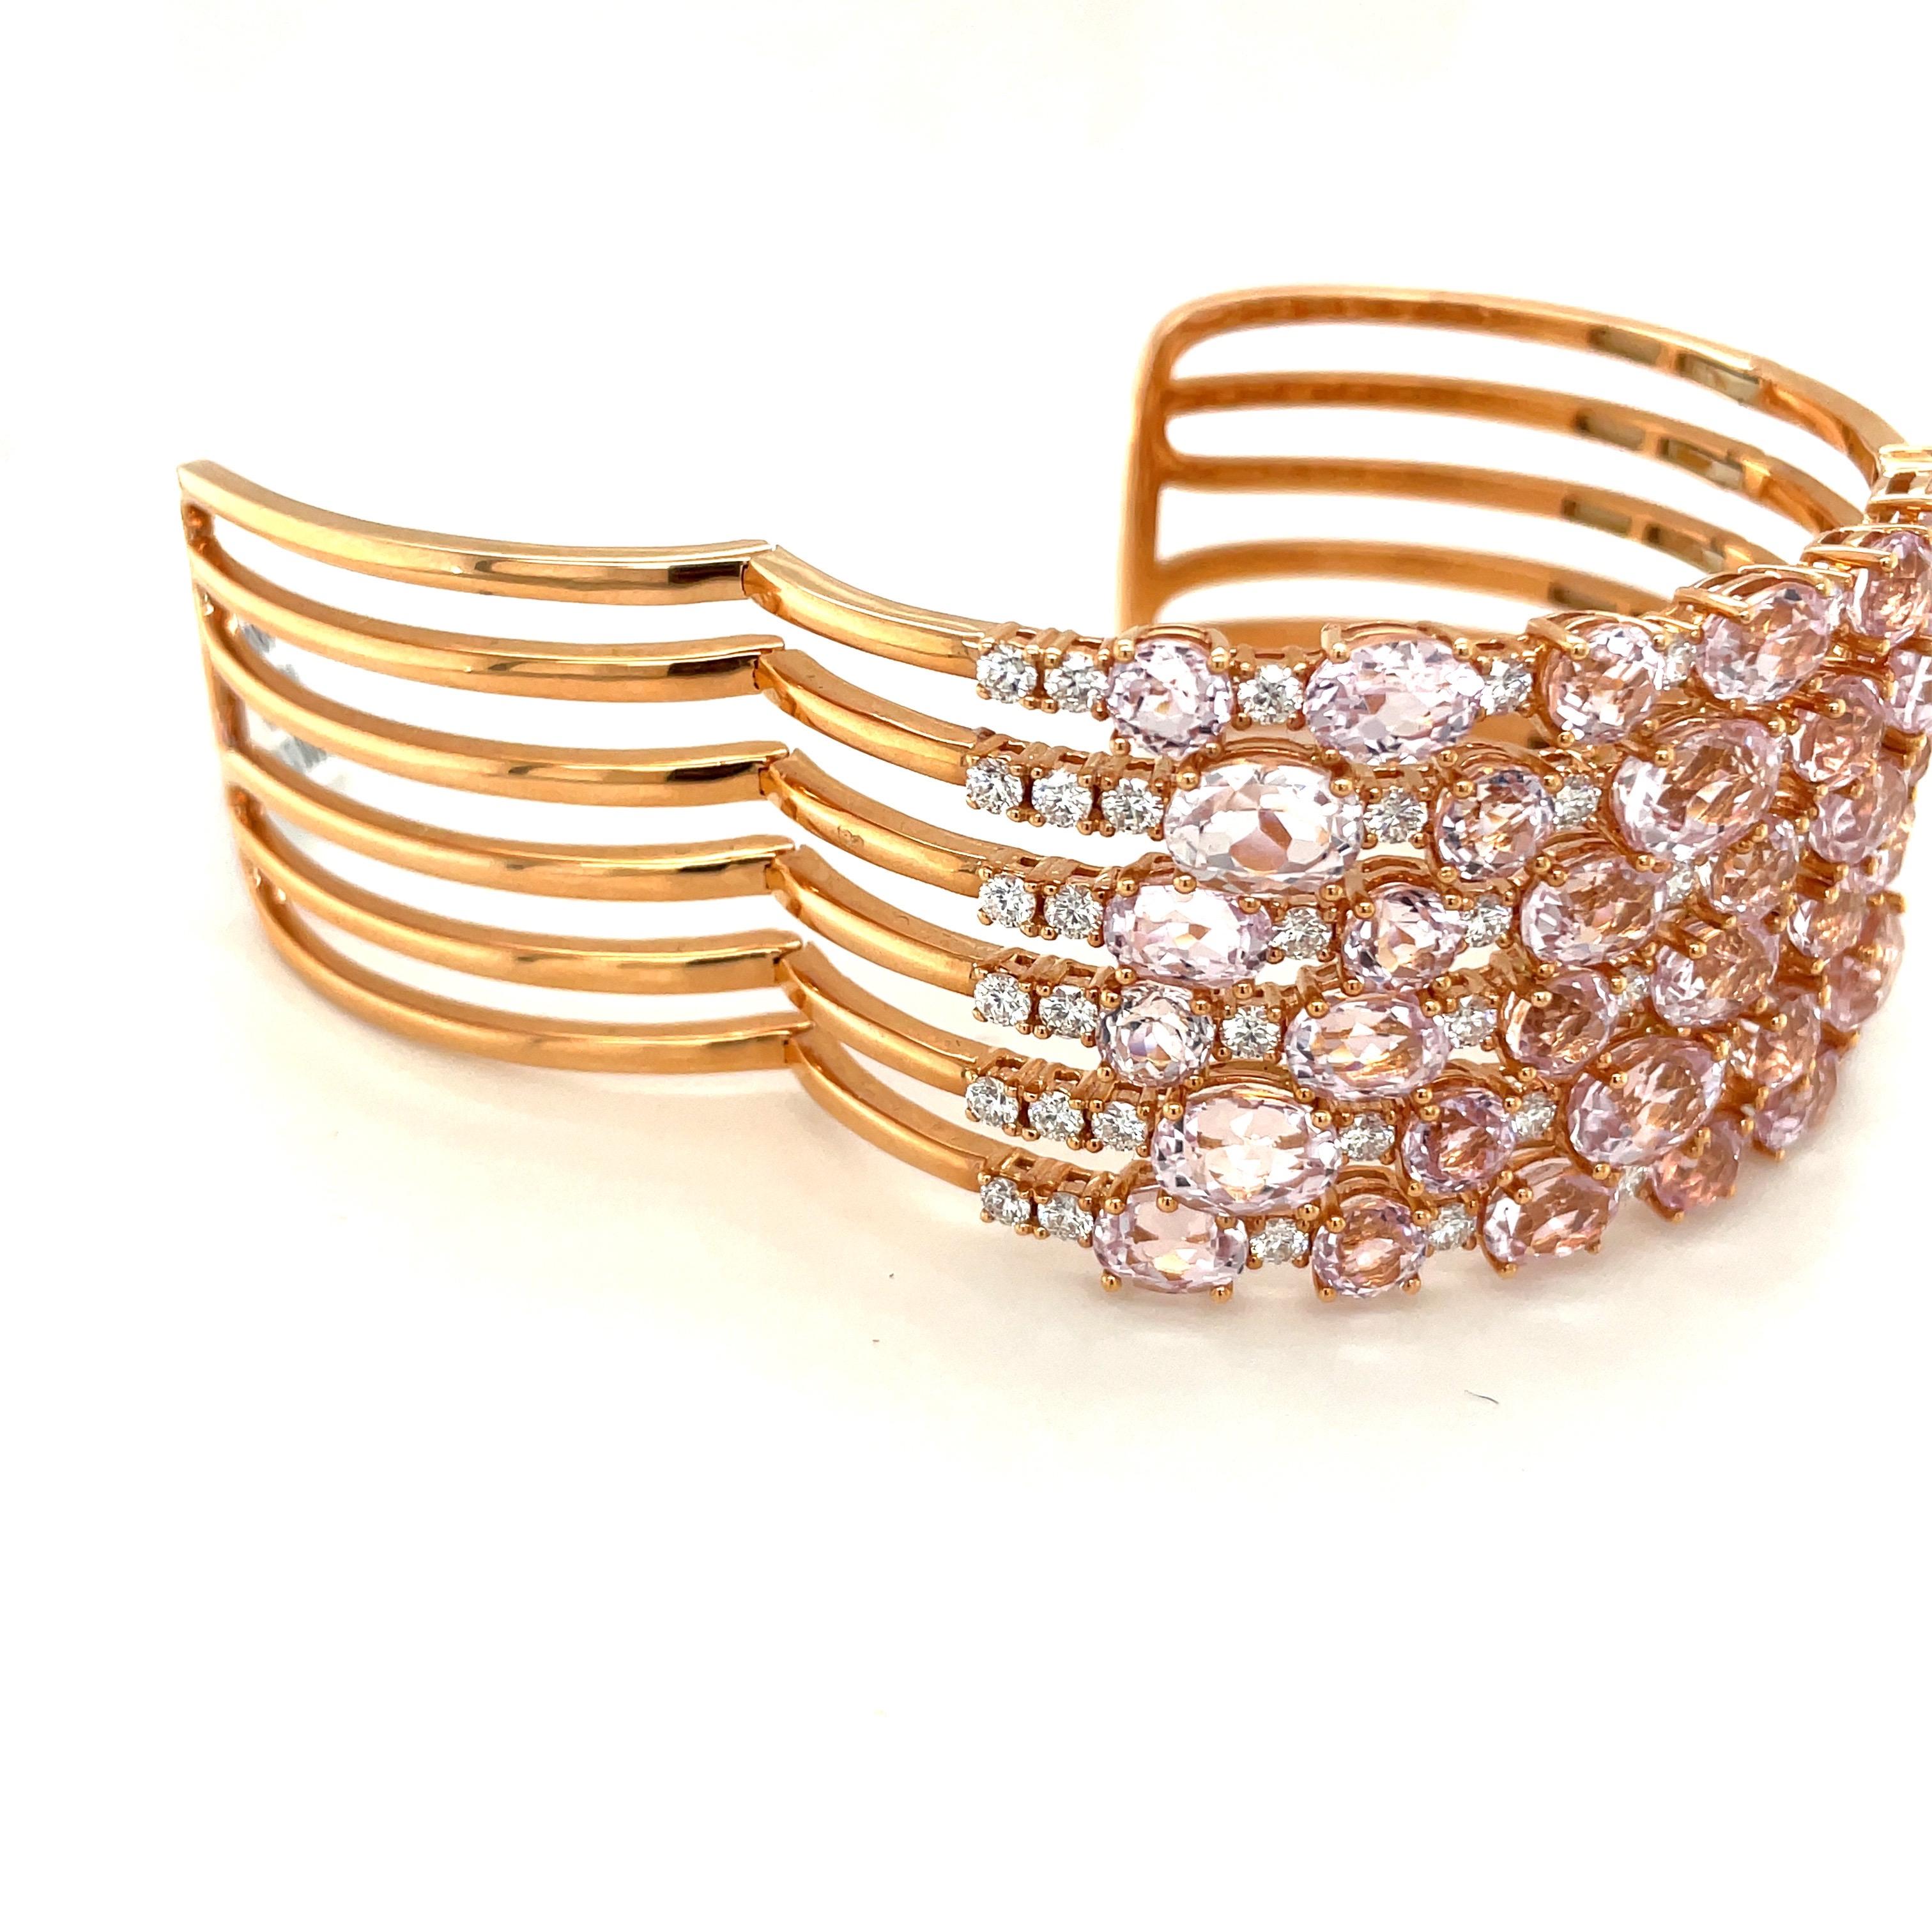 This 18 karat rose gold cuff bracelet is designed with 34 oval and round kunzite stones weighing 35.28 carats. Round white brilliant diamonds 3.70 carats, alternate with the kunzites. The stones are set on 6 rose gold sections of this 1.25